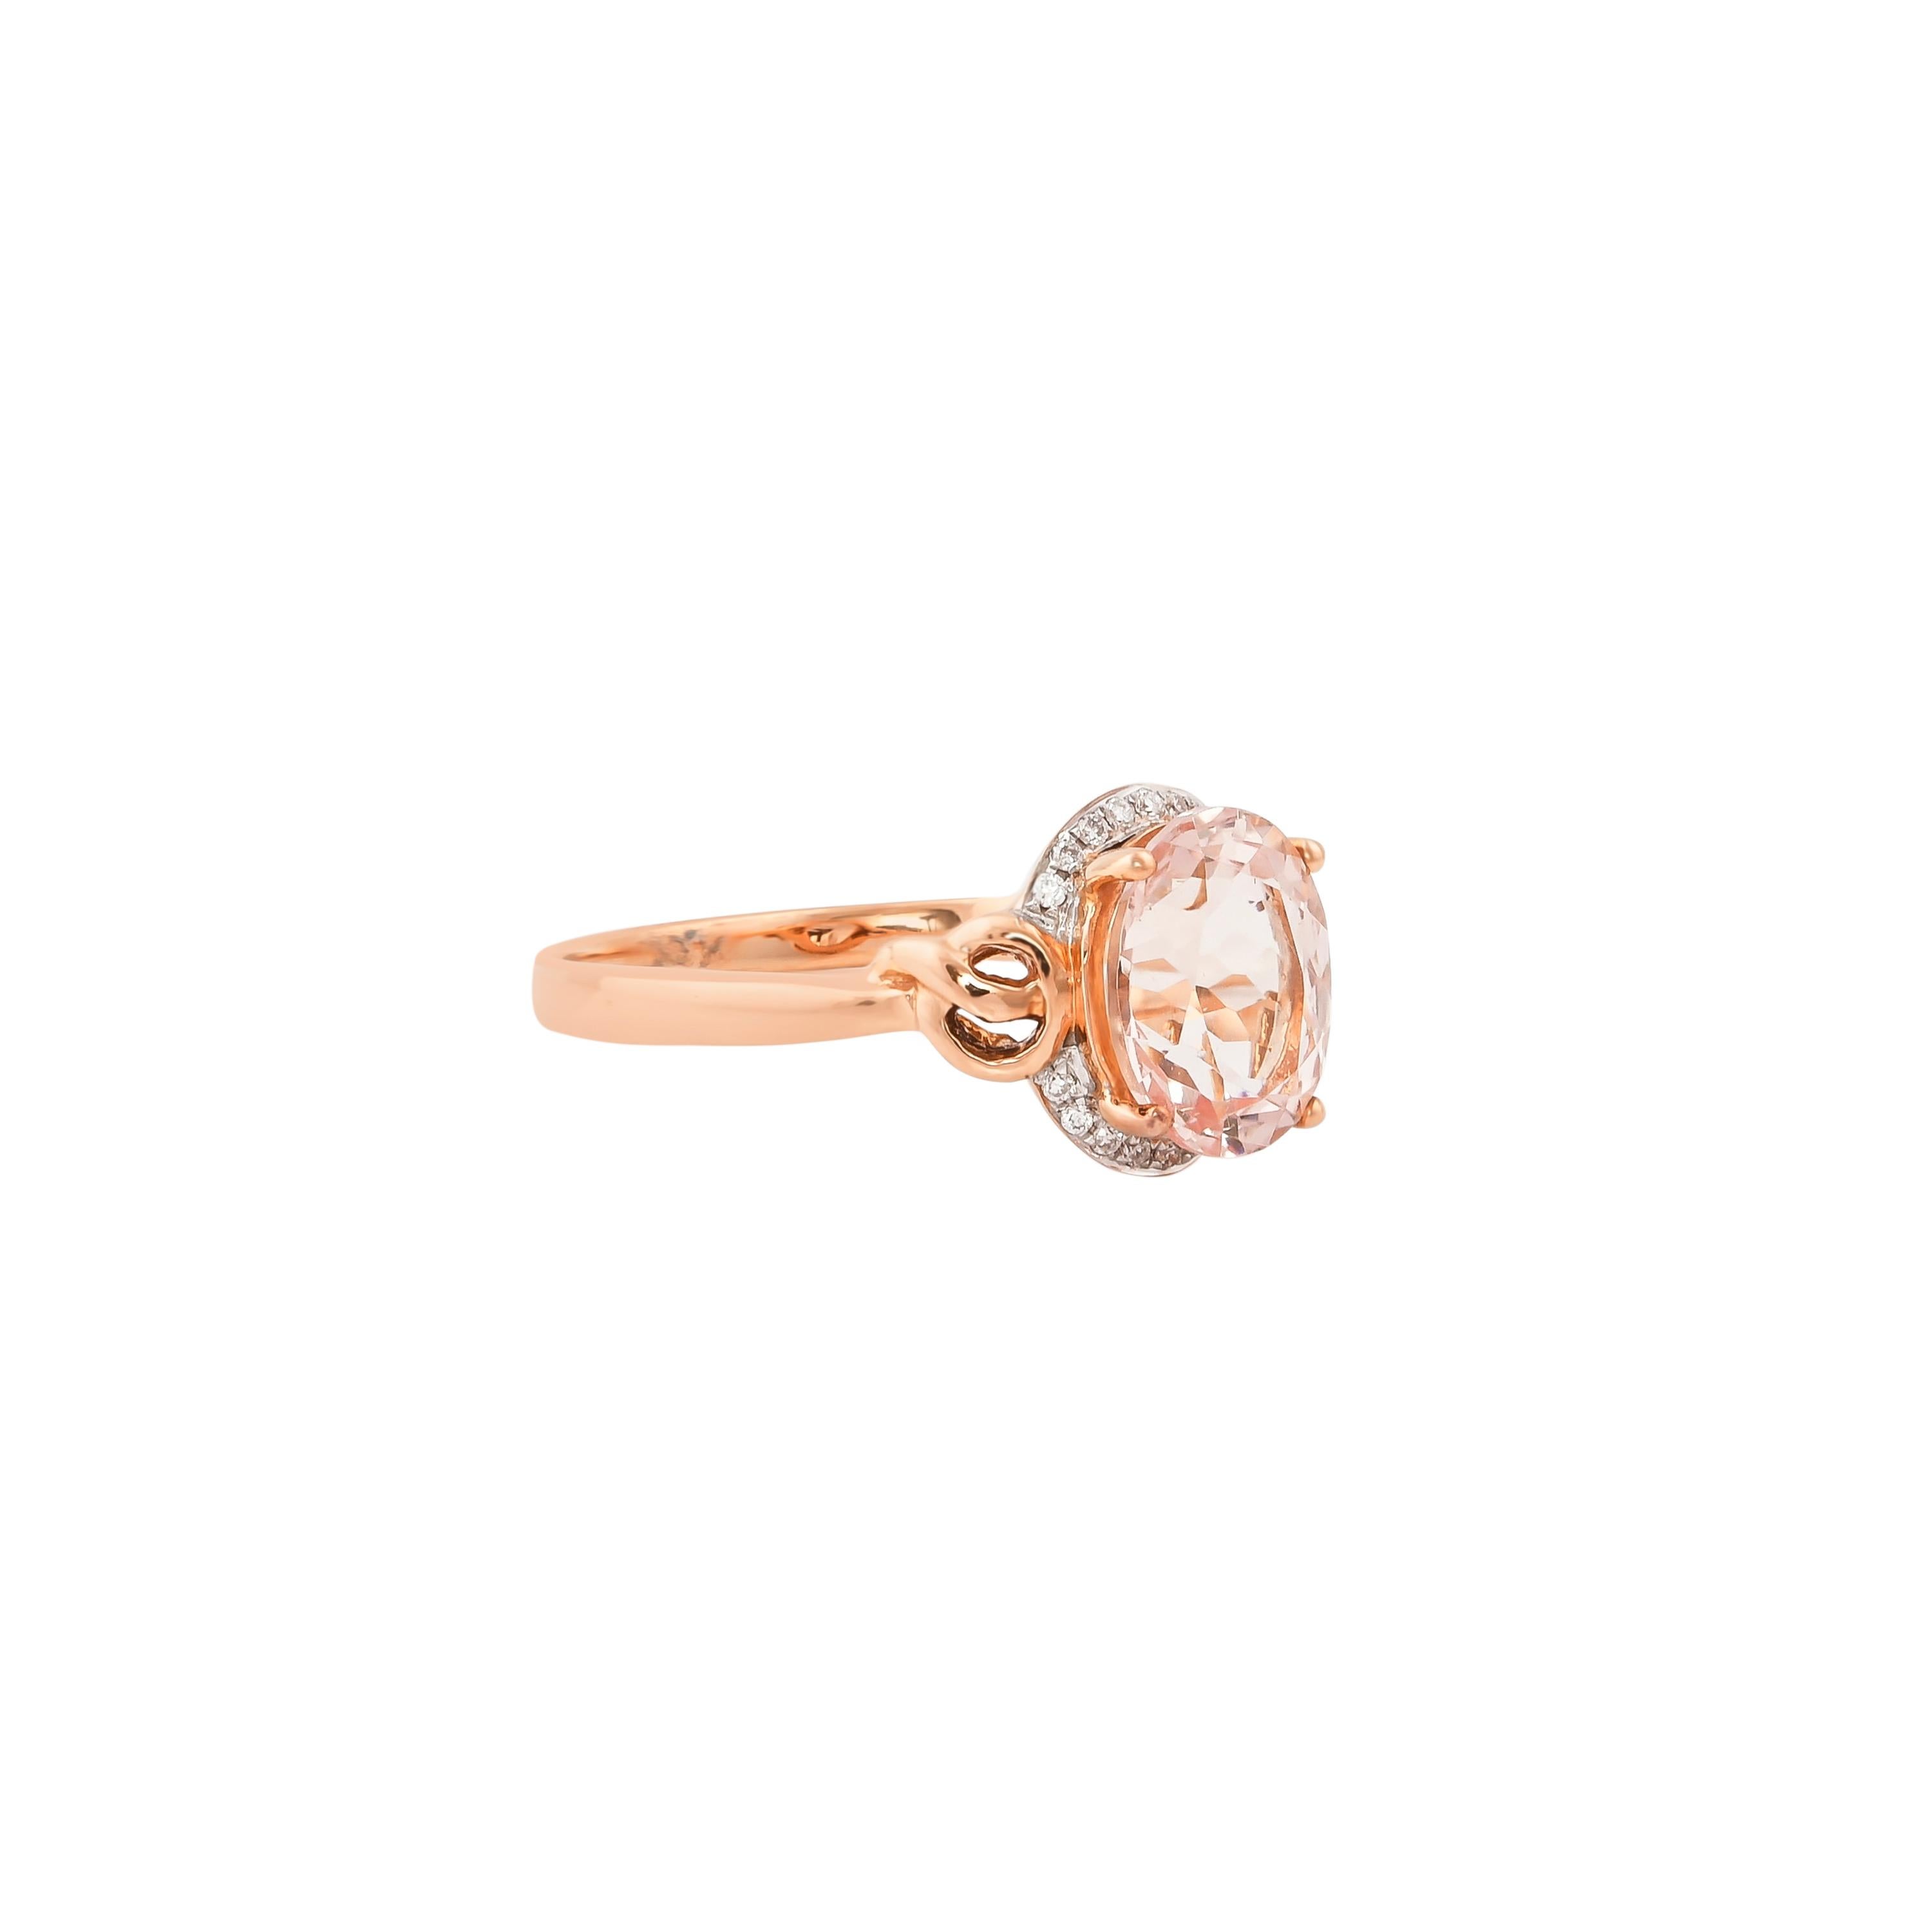 This collection features an array of magnificent morganites! Accented with diamonds these rings are made in rose gold and present a classic yet elegant look. 

Classic morganite ring in 18K rose gold with diamonds. 

Morganite: 1.83 carat oval